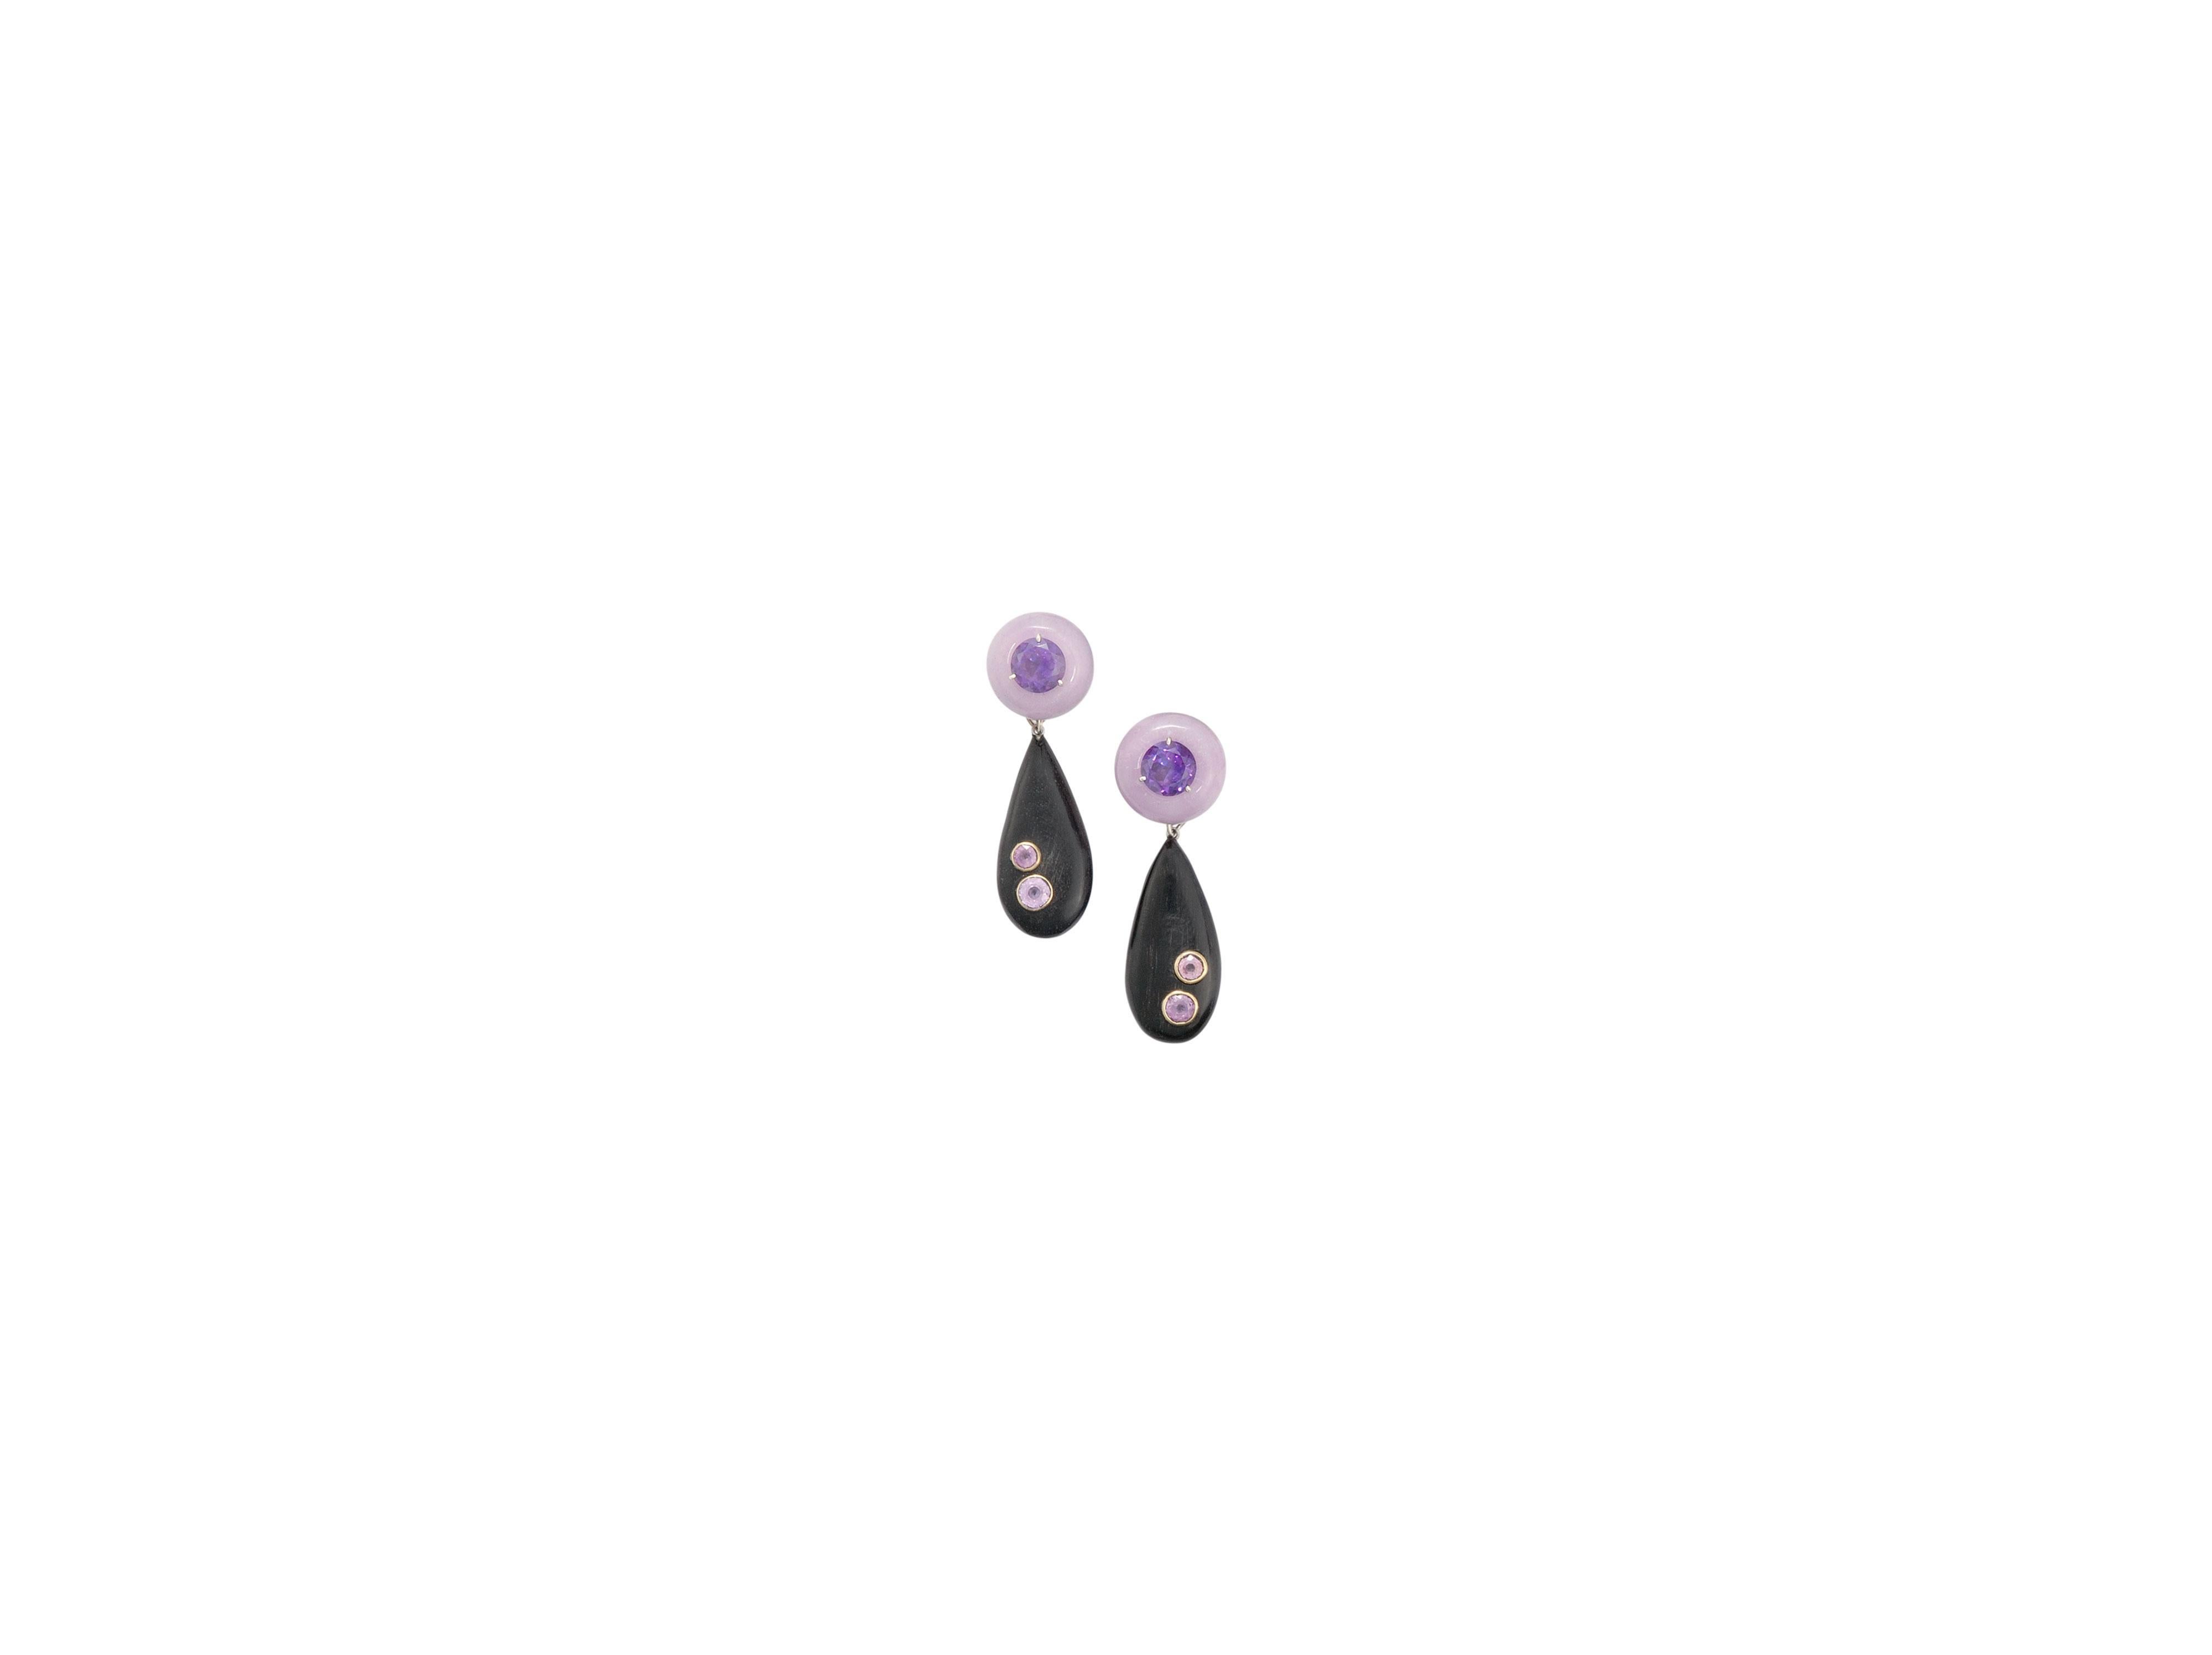 Purple jade Donut Earrings (16mm radius )with faceted Amethyst center and detachable pave pink Sapphire drops with pave diamond on top. Set in 18 karat white gold, signed Sorab & Roshi.

Ameth= 4.55 cts., P.Saph=4.92 cts., dia=0.24 cts.

0.60